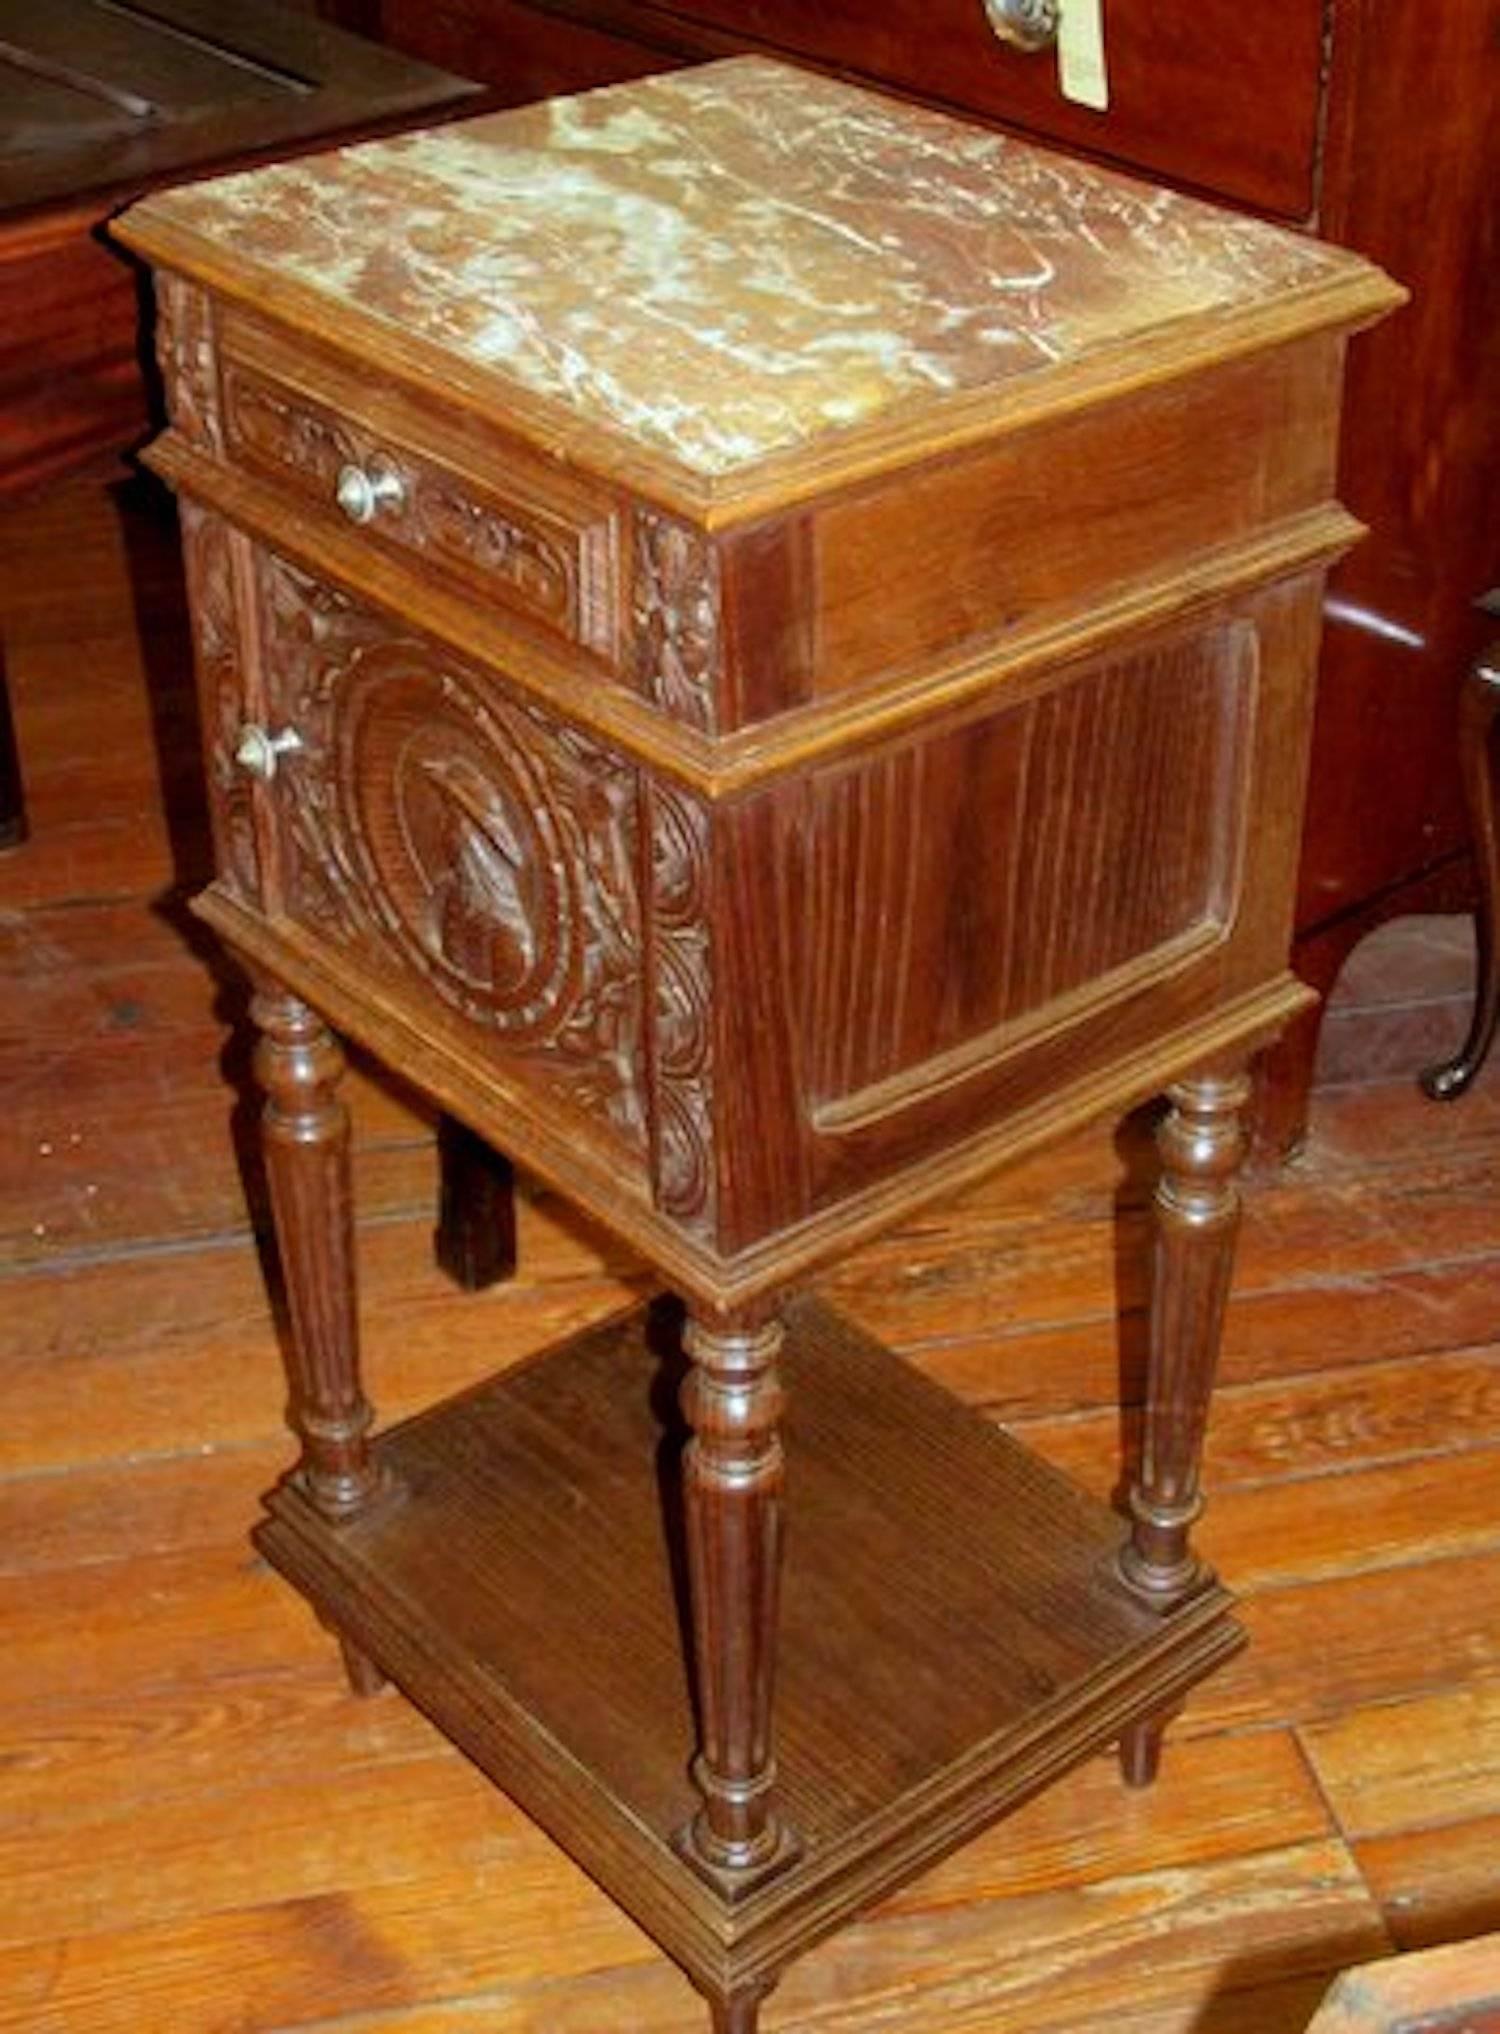 Fabulous hand-carved old French oak marble-top pot cupboard. Please note exceptional hand-carved door, in the Breton style. Marble is original and in perfect condition.